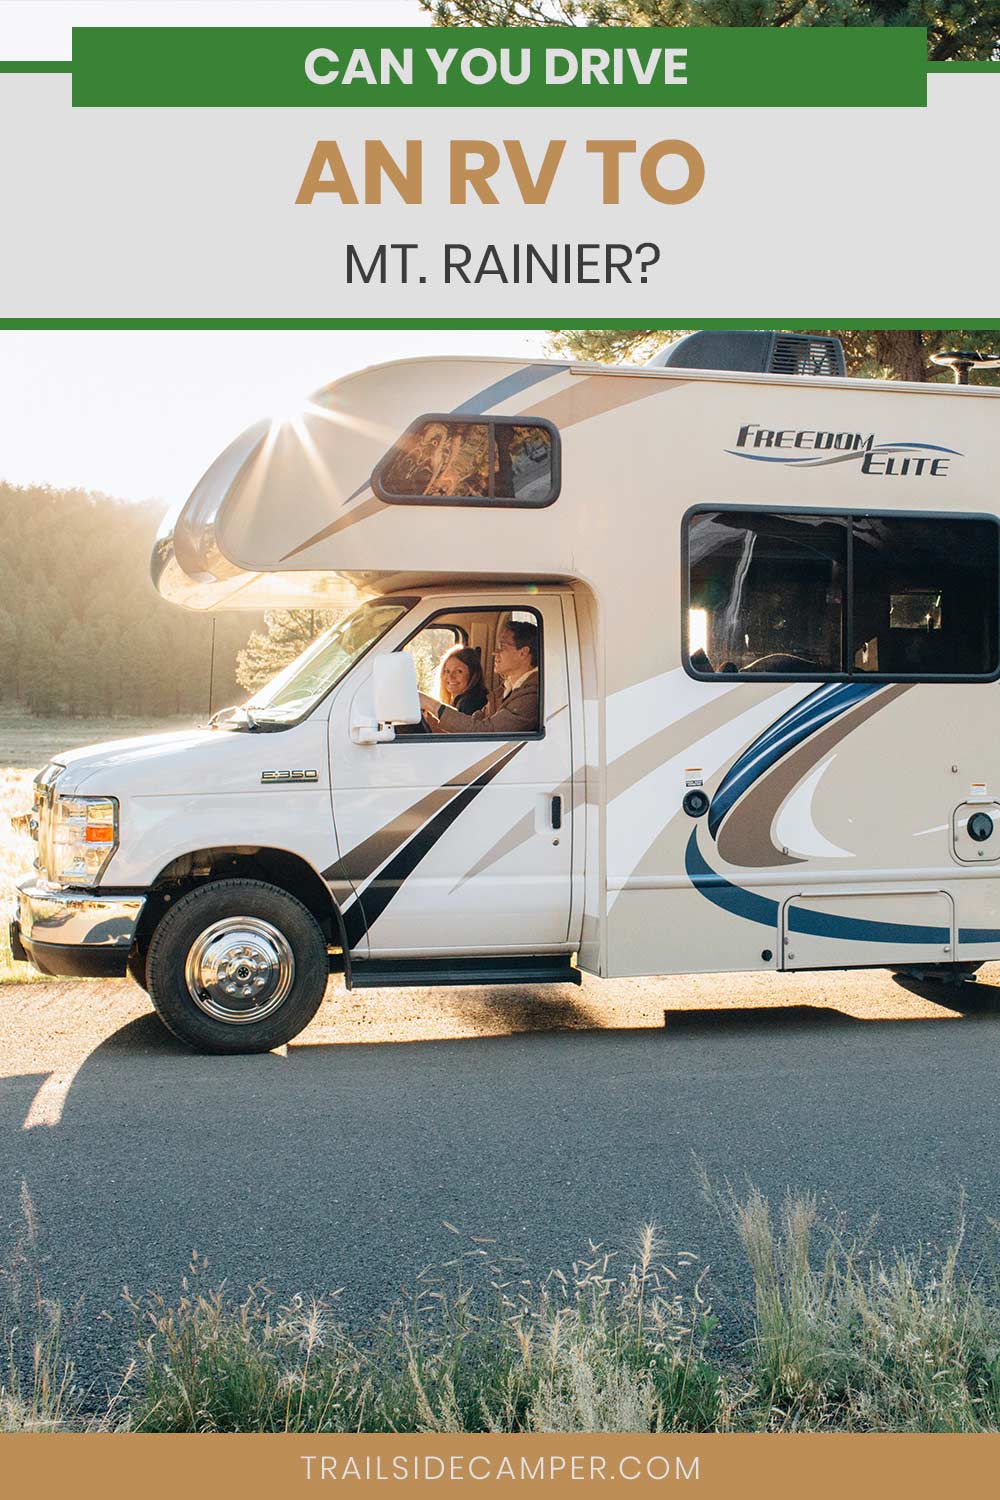 Can You Drive an RV to Mt. Rainier?